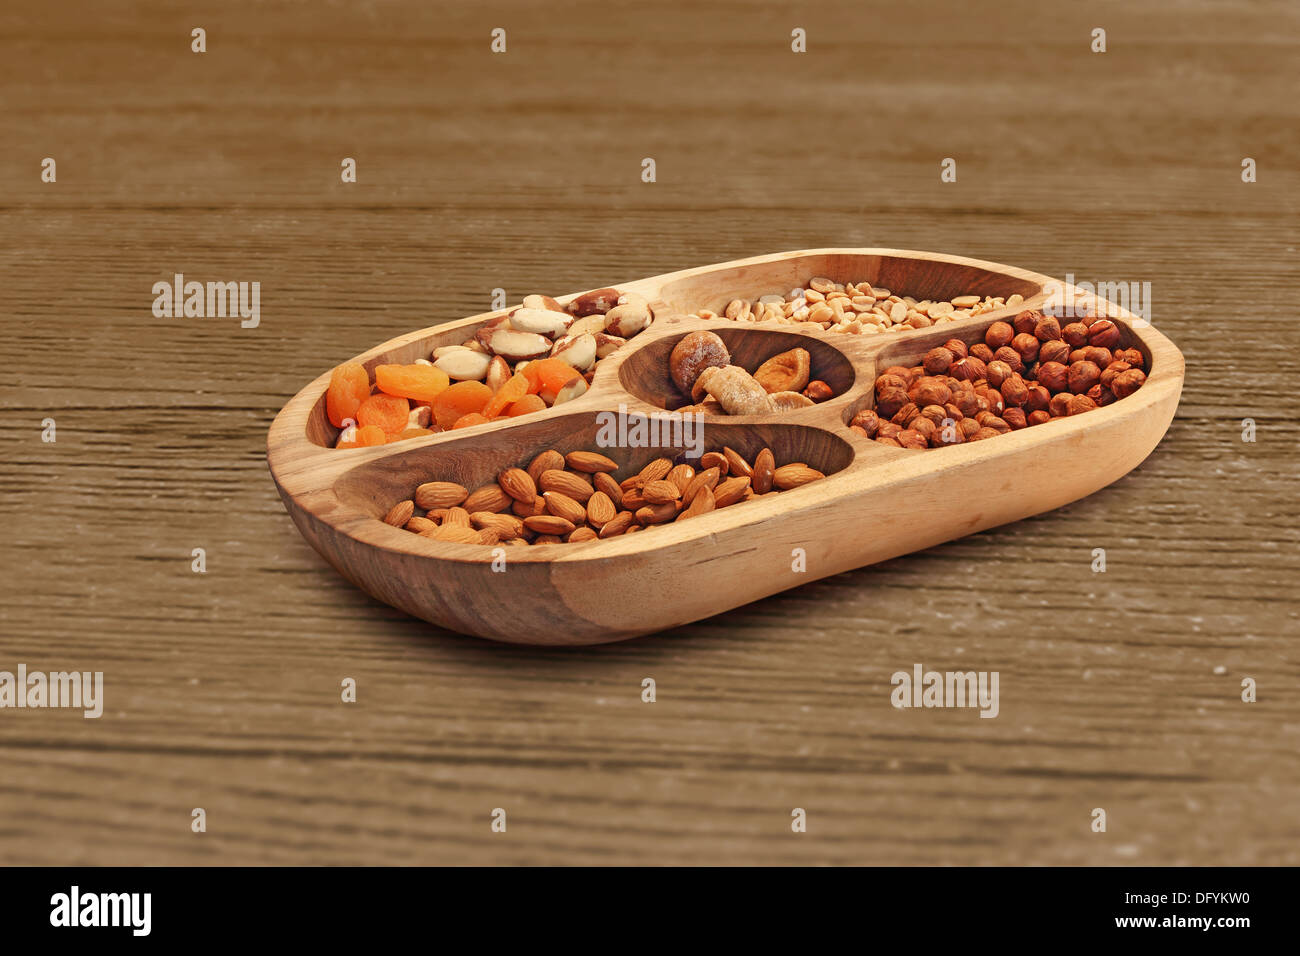 Hazelnuts, almonds and other different dried fruits in a wooden bowl Stock Photo